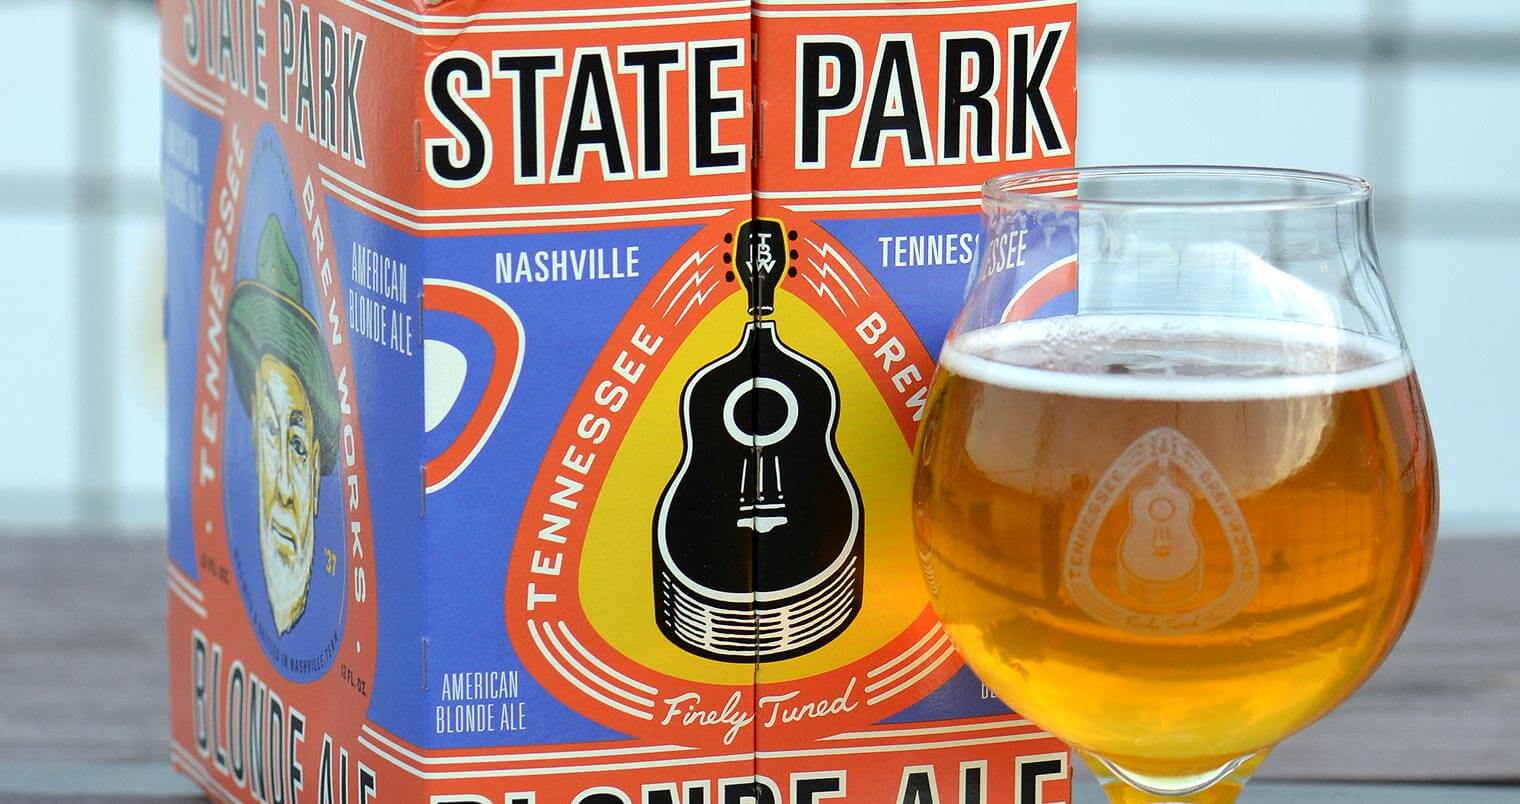 Tennessee Brew Works Launches State Park Blonde Ale, featured image